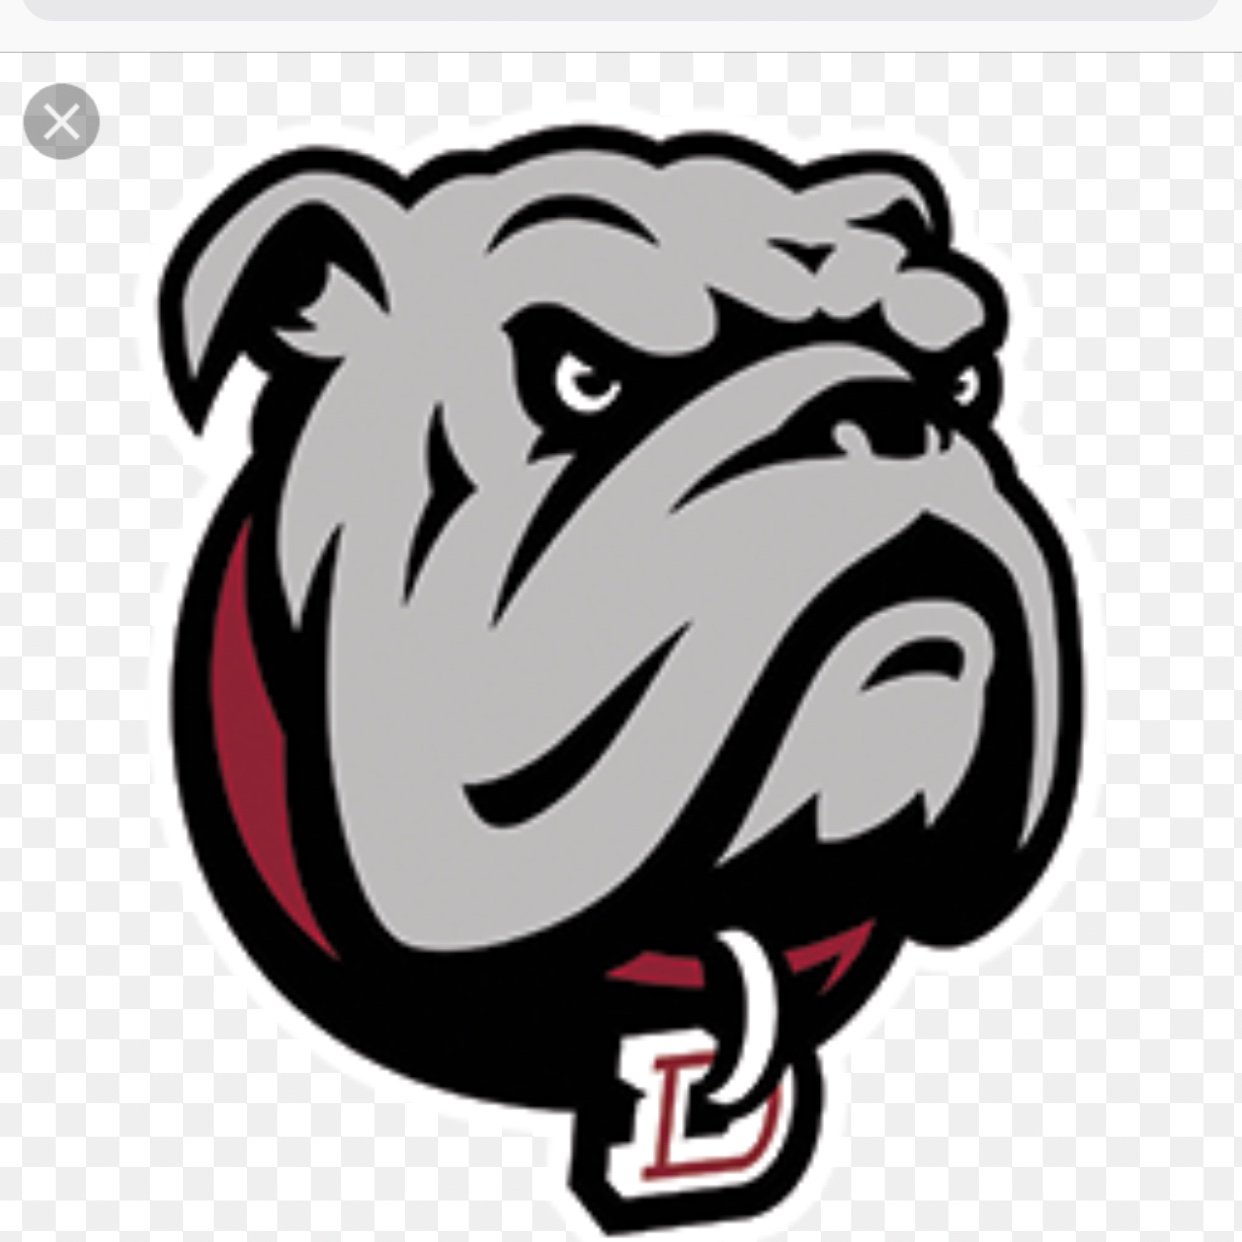 The Official Twitter Account of the Dean College Bulldogs Football Team. #BulldogNation New Incomer into NCAA D3 ECFC Football Conference